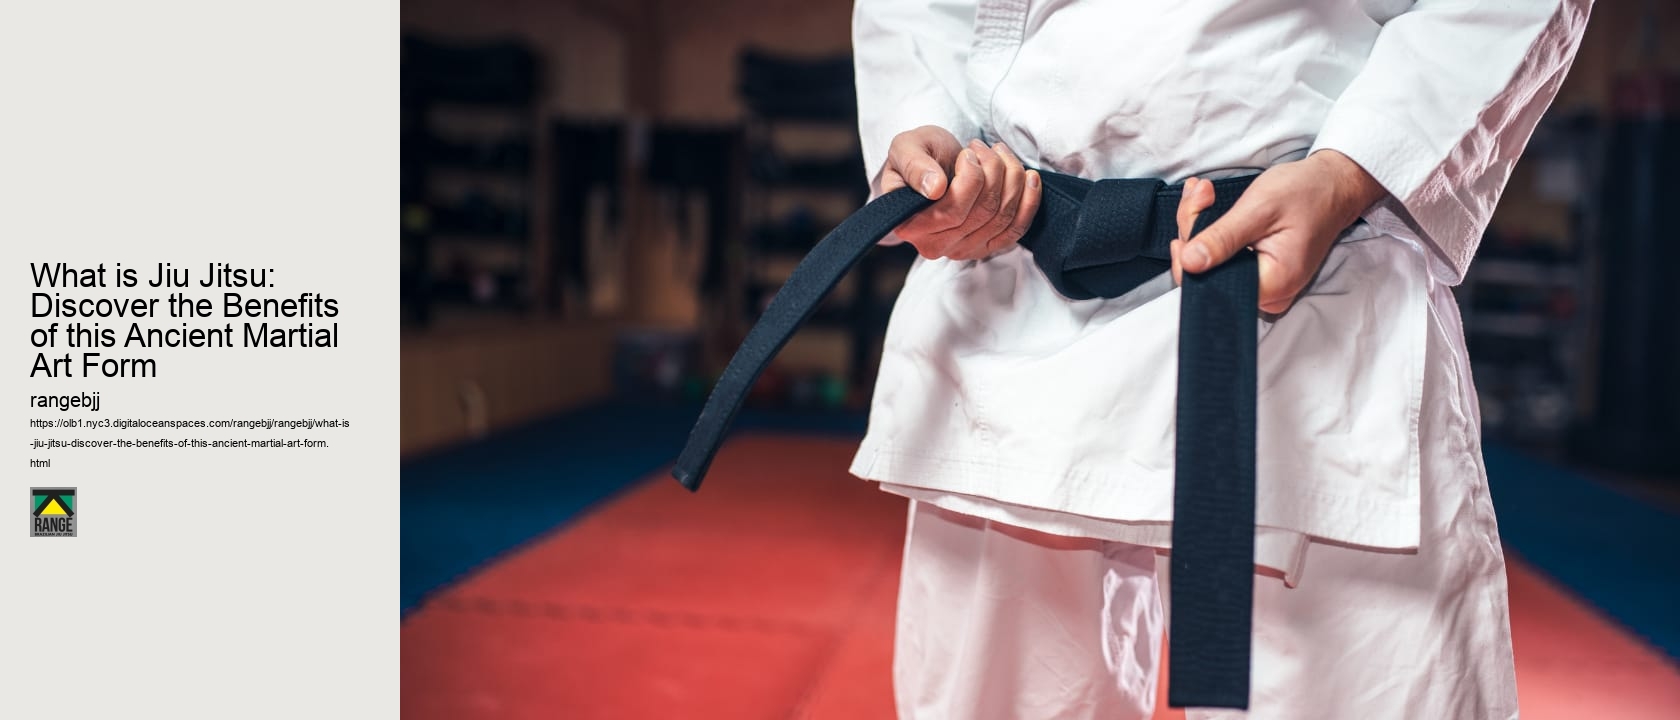 What is Jiu Jitsu: Discover the Benefits of this Ancient Martial Art Form